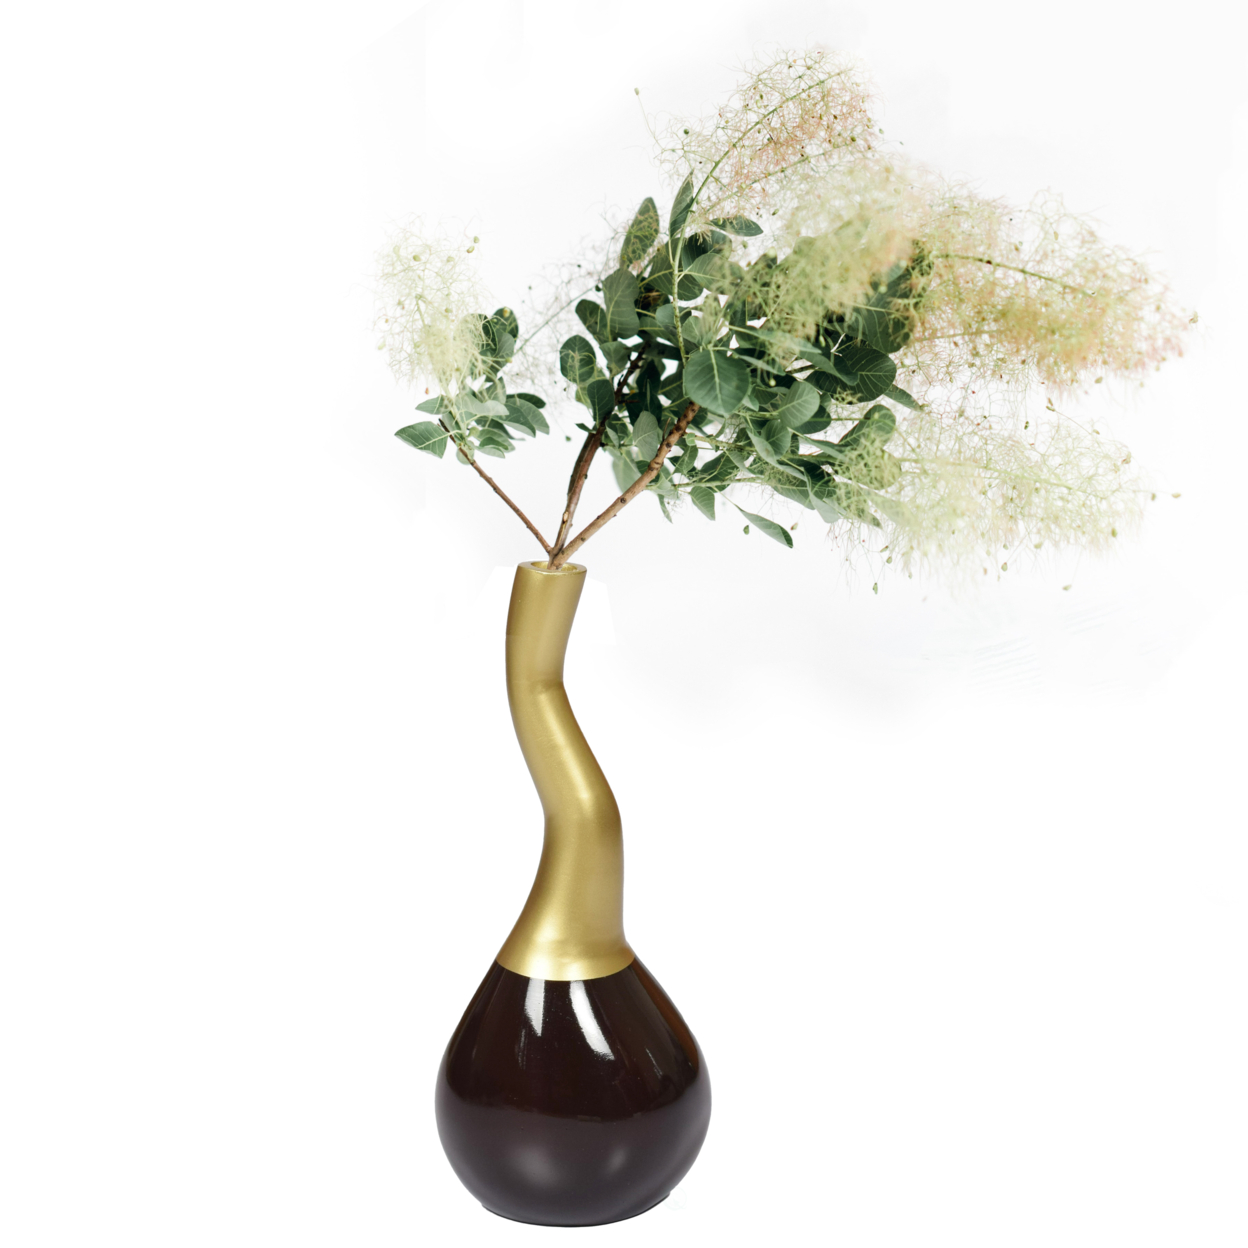 Decorative Modern Table Flower Vase Aluminium-Casted, Two Tone Brown And Gold 10 Inch